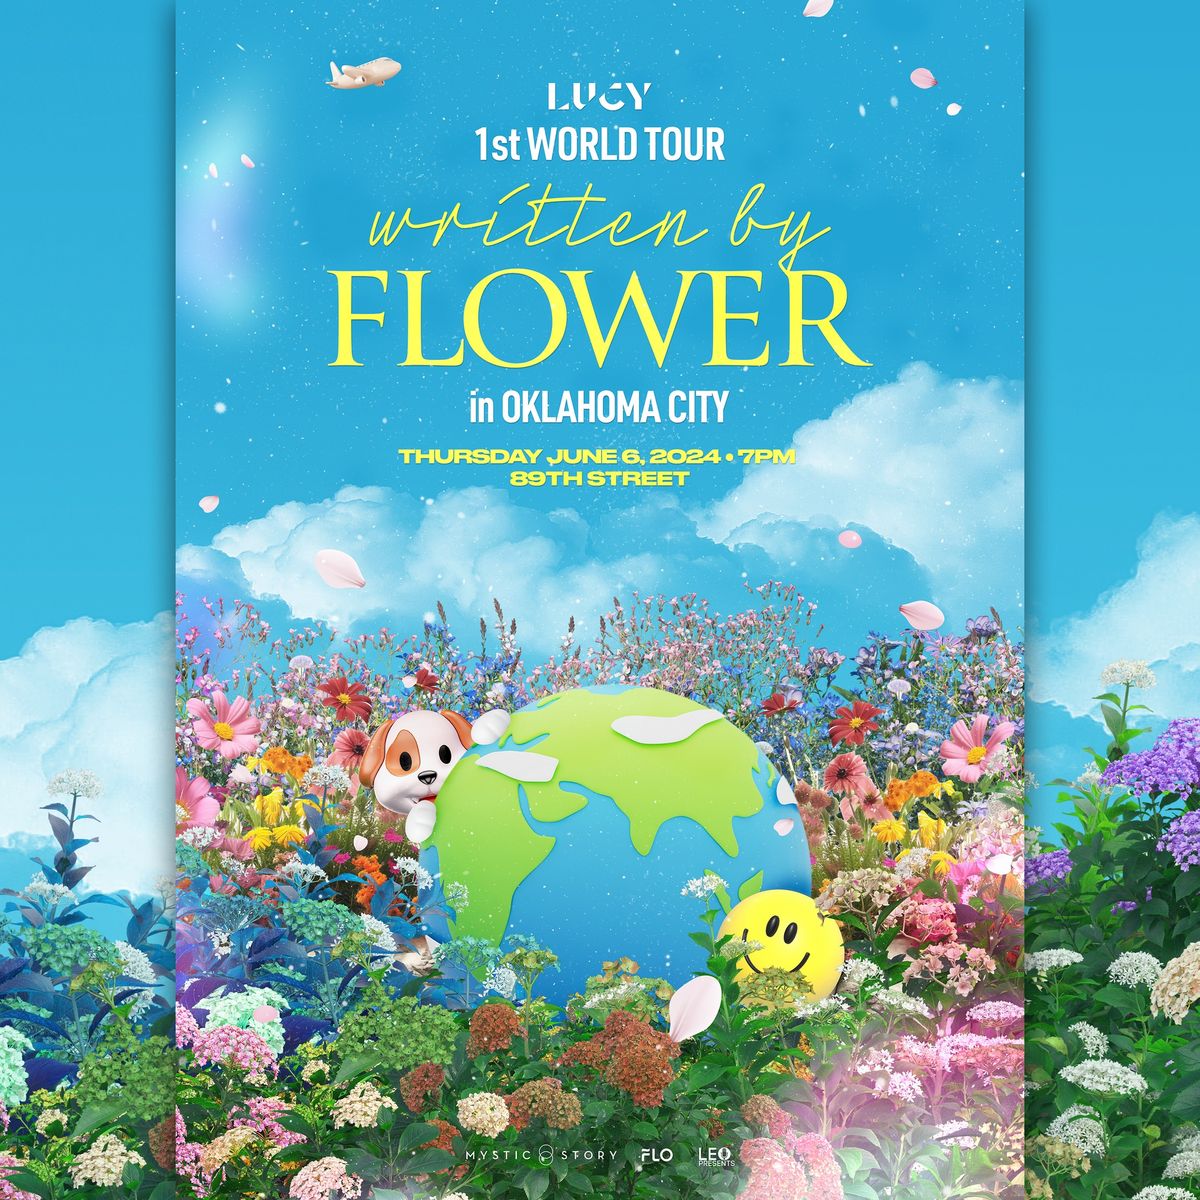 LUCY - 1st World Tour 'written by FLOWER' in Oklahoma City